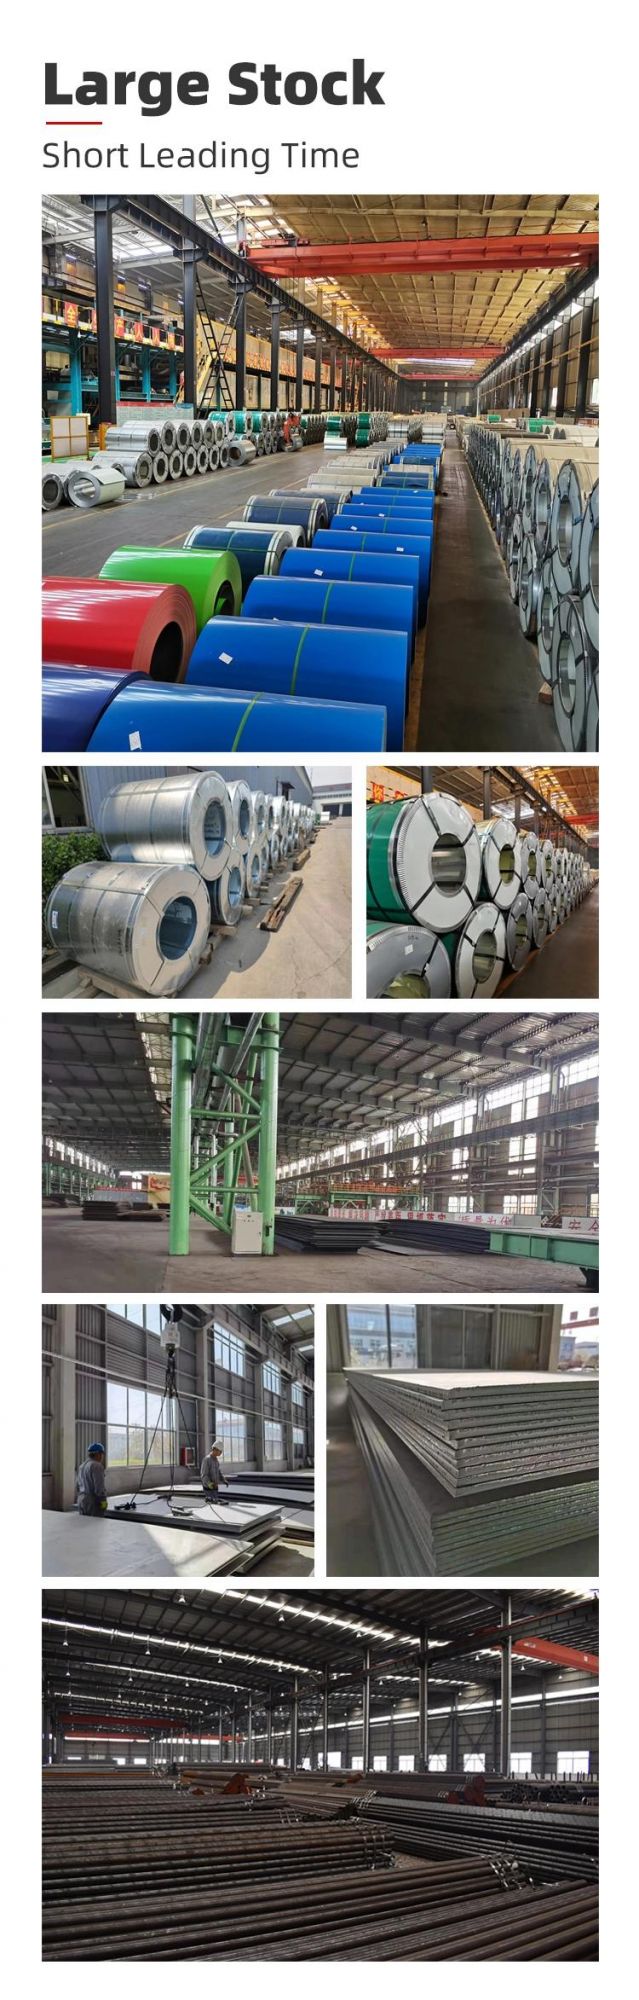 China Best Selling Ss Stainless Steel Pipe 201 304 316 Welding Stainless Steel Pipes and Tube